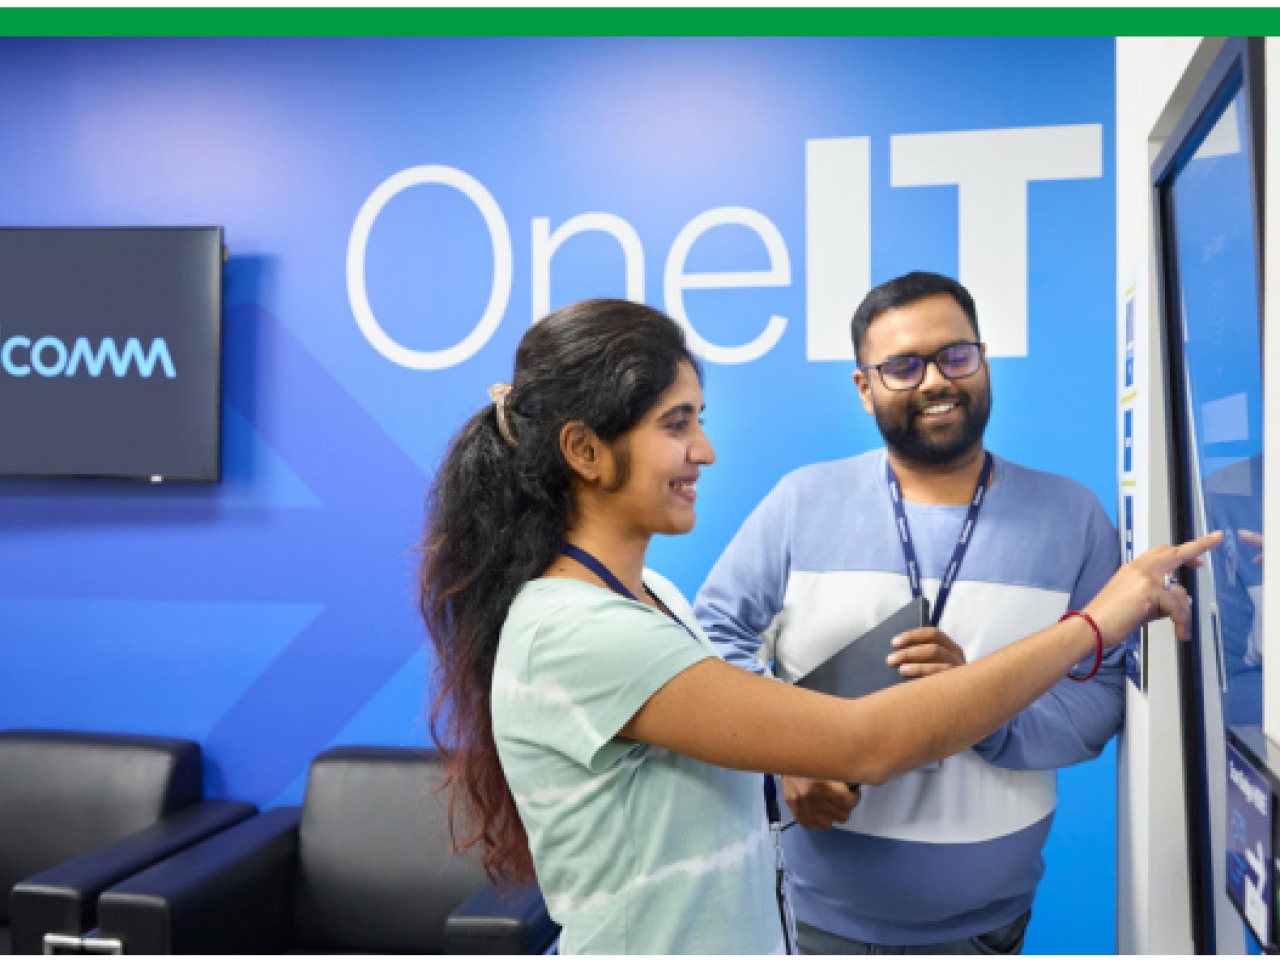 Two smiling people looking at a large touch-screen display. "OneIT" on the wall behind them.